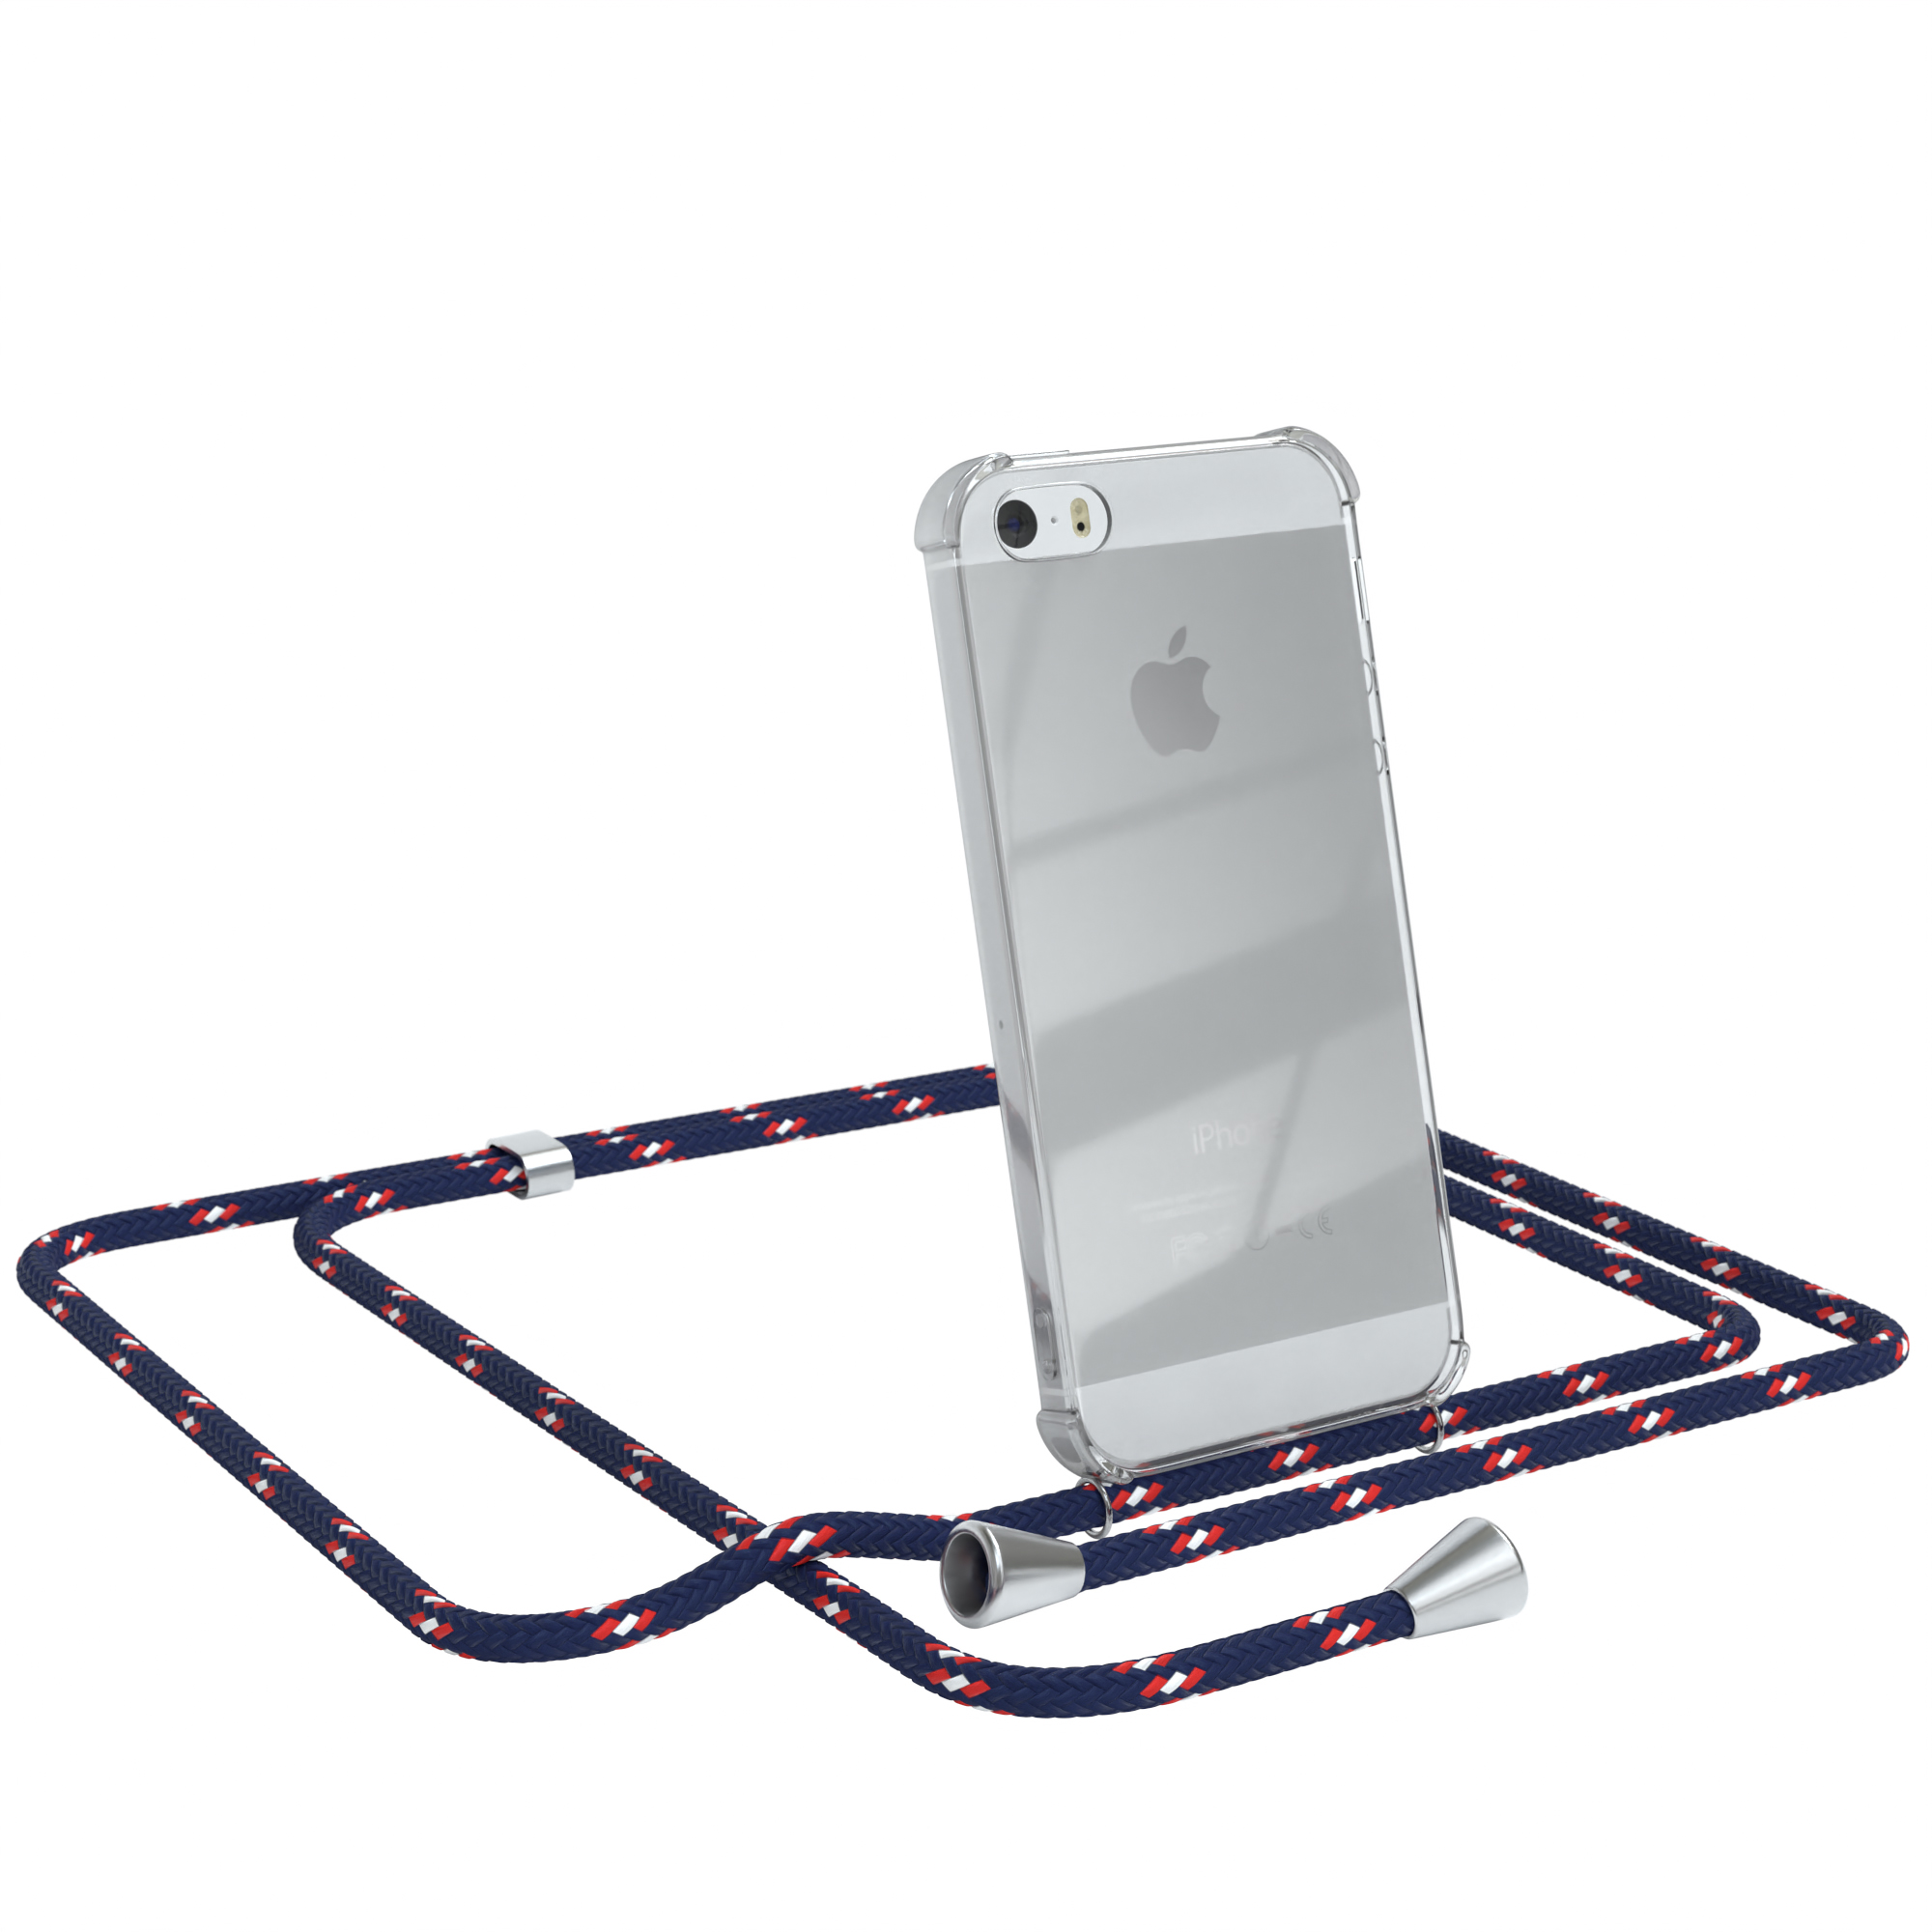 2016, / Cover CASE mit iPhone Umhängetasche, Clear Apple, Camouflage 5S, SE Clips / Silber iPhone EAZY 5 Blau Umhängeband,